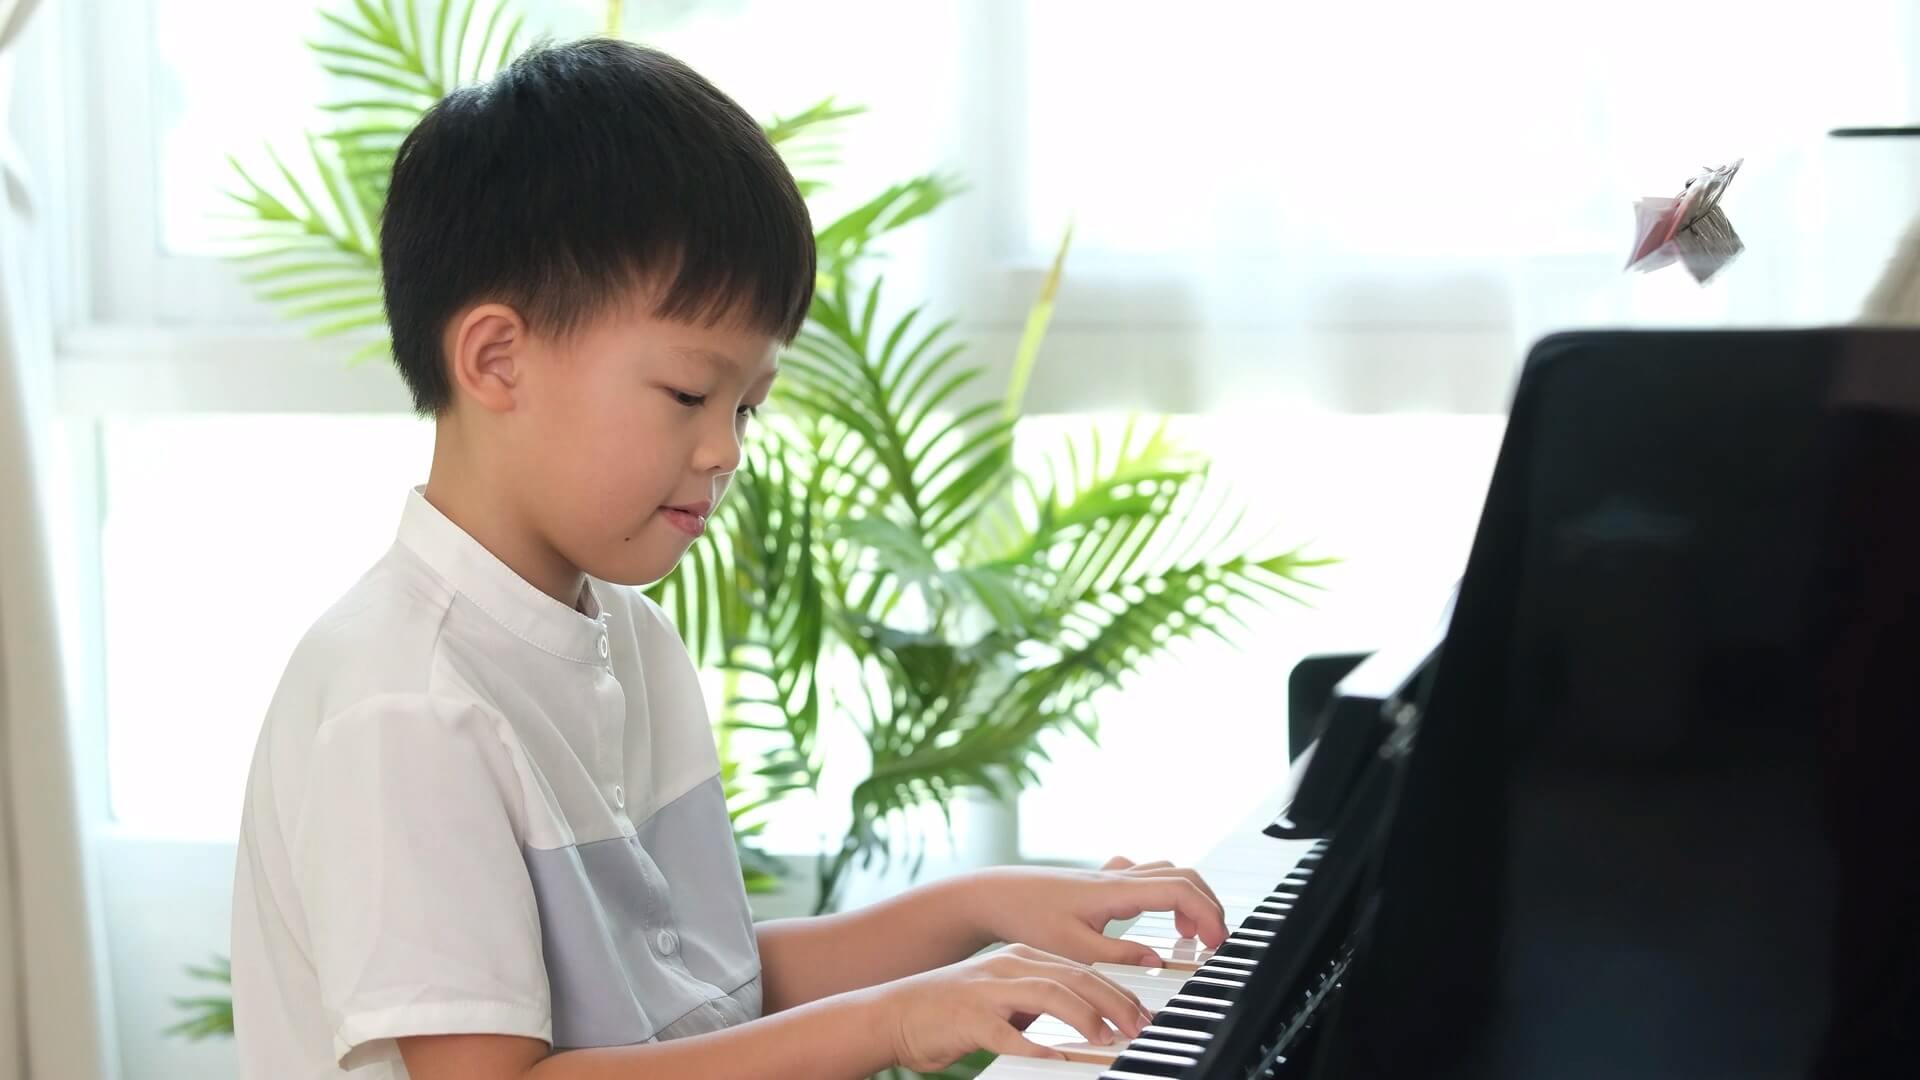 A young boy with black hair sitting at the piano, playing with both hands.